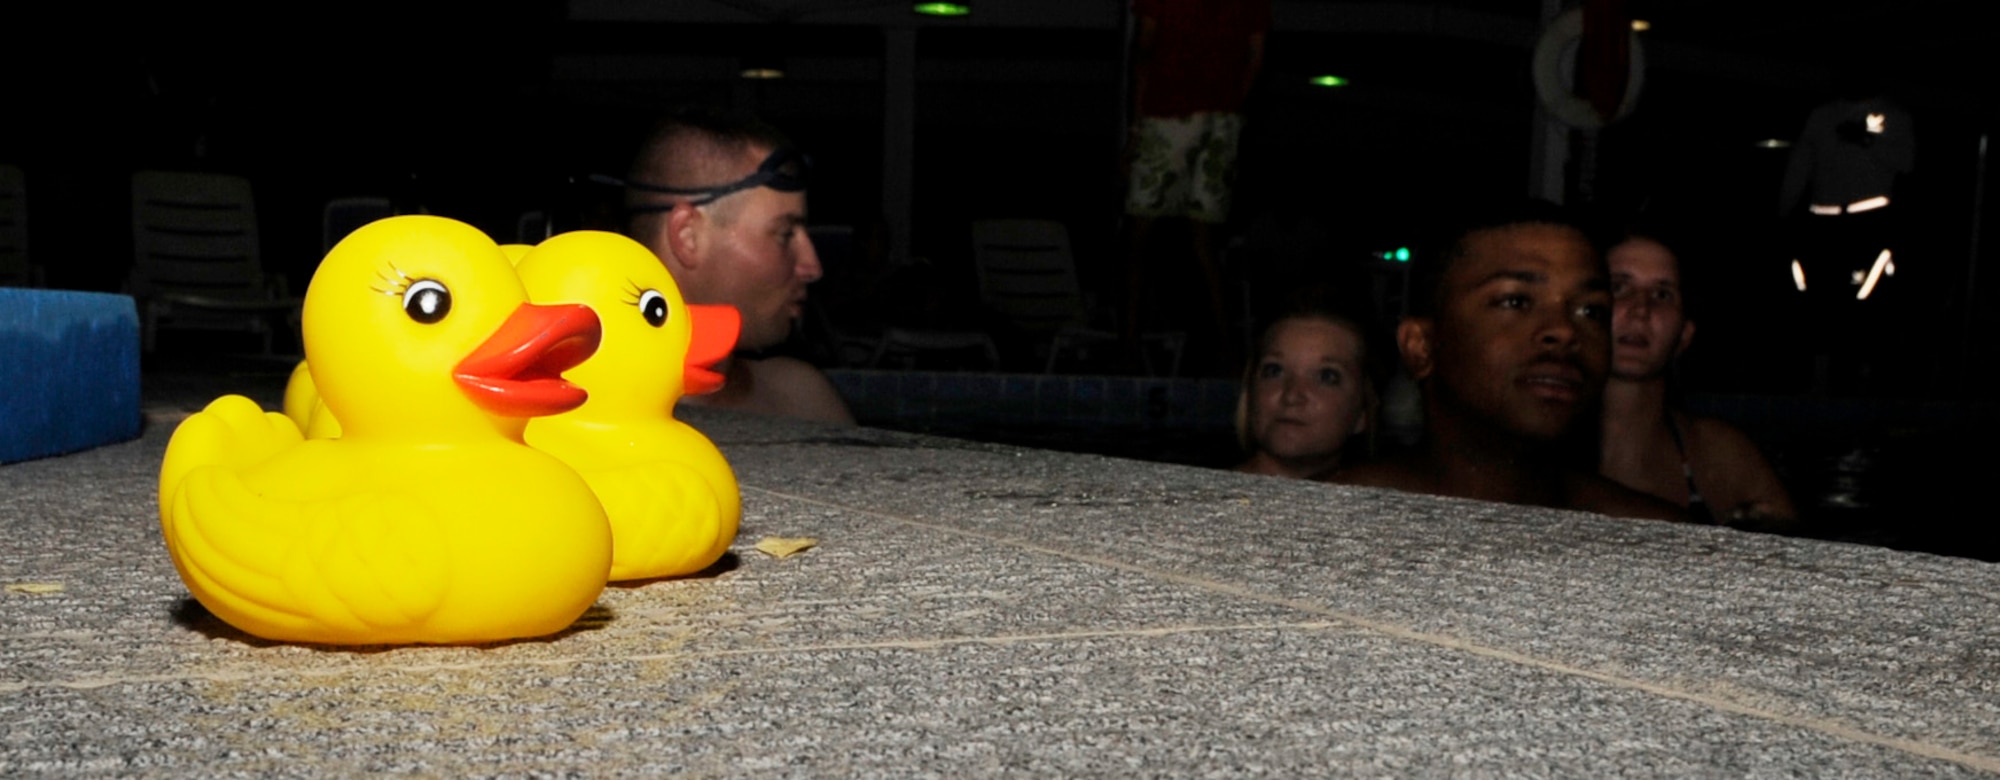 SOUTHWEST ASIA – Several 386th Air Expeditionary Wing Airmen took part in the rubber ducky race during the 101 Days of Summer Pool Party hosted by the 386th Force Support Squadron here June 23. The Airmen also participated in a noodle race and ping-pong pick-up.  (U.S. Air Force photo/Staff Sgt. Alexandra M. Boutte) (U.S. Air Force photo/Staff Sgt. Alexandra M. Boutte) 